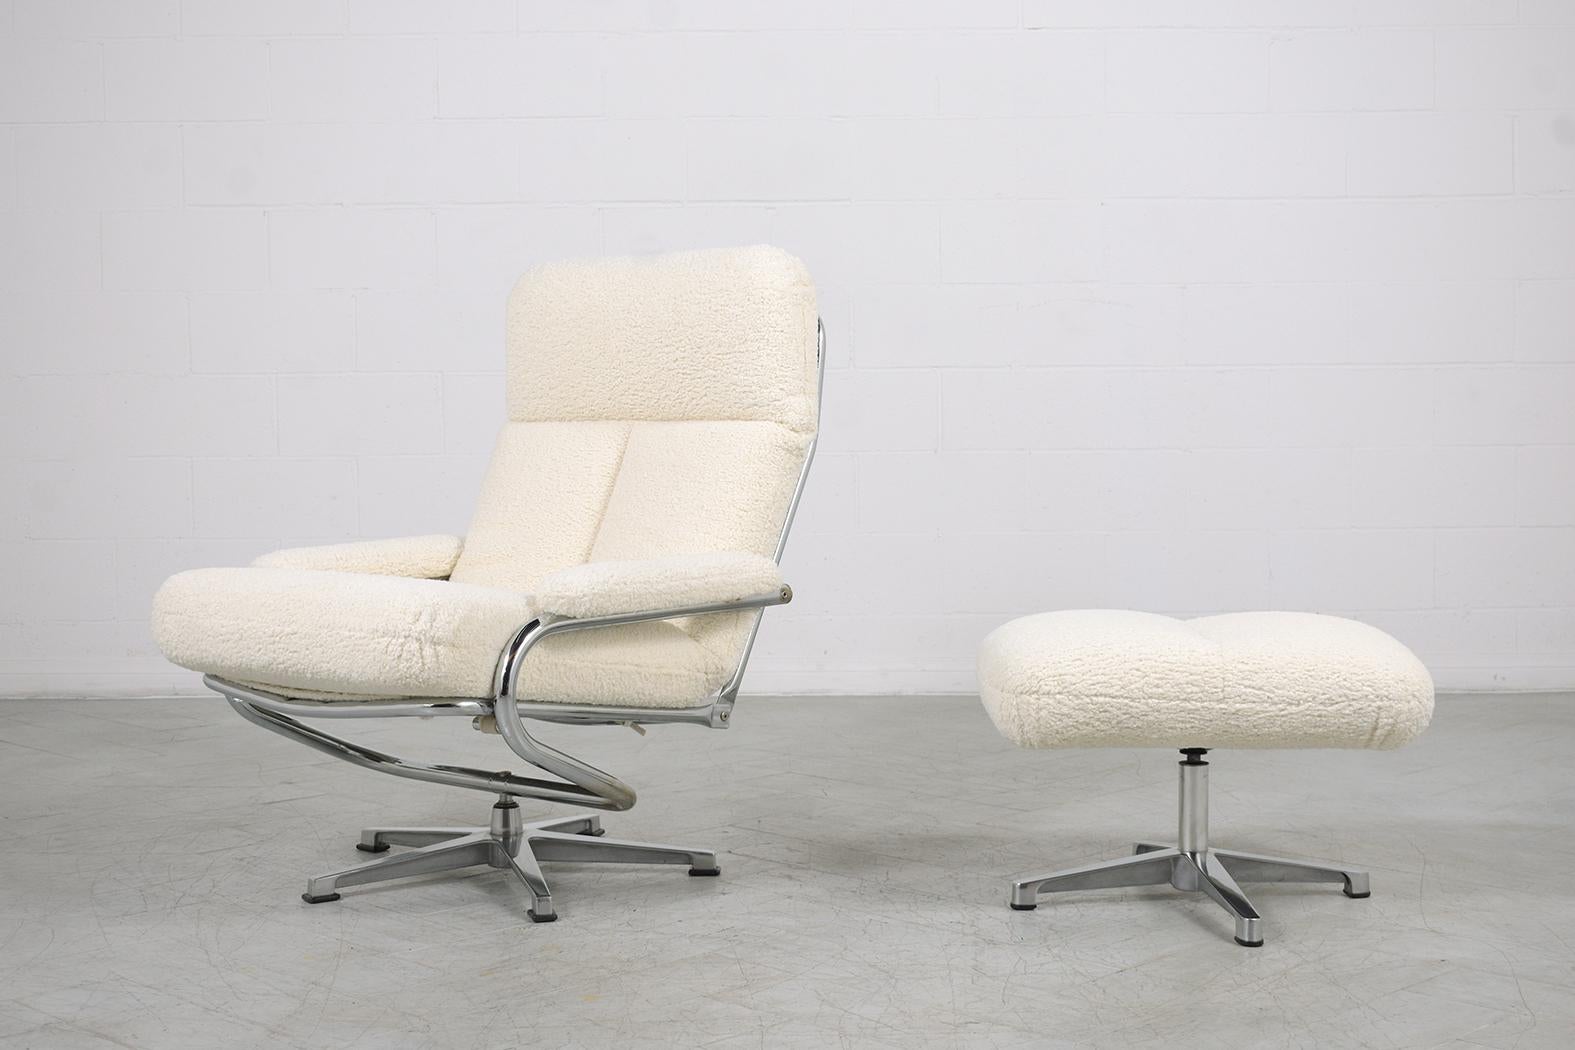 This extraordinary mid-century modern set of a recliner chair and an ottoman is in great condition the sleek frame chair is hand-crafted out of tubular steel and plated in chrome in good condition and has been newly cleaned and polished developing a